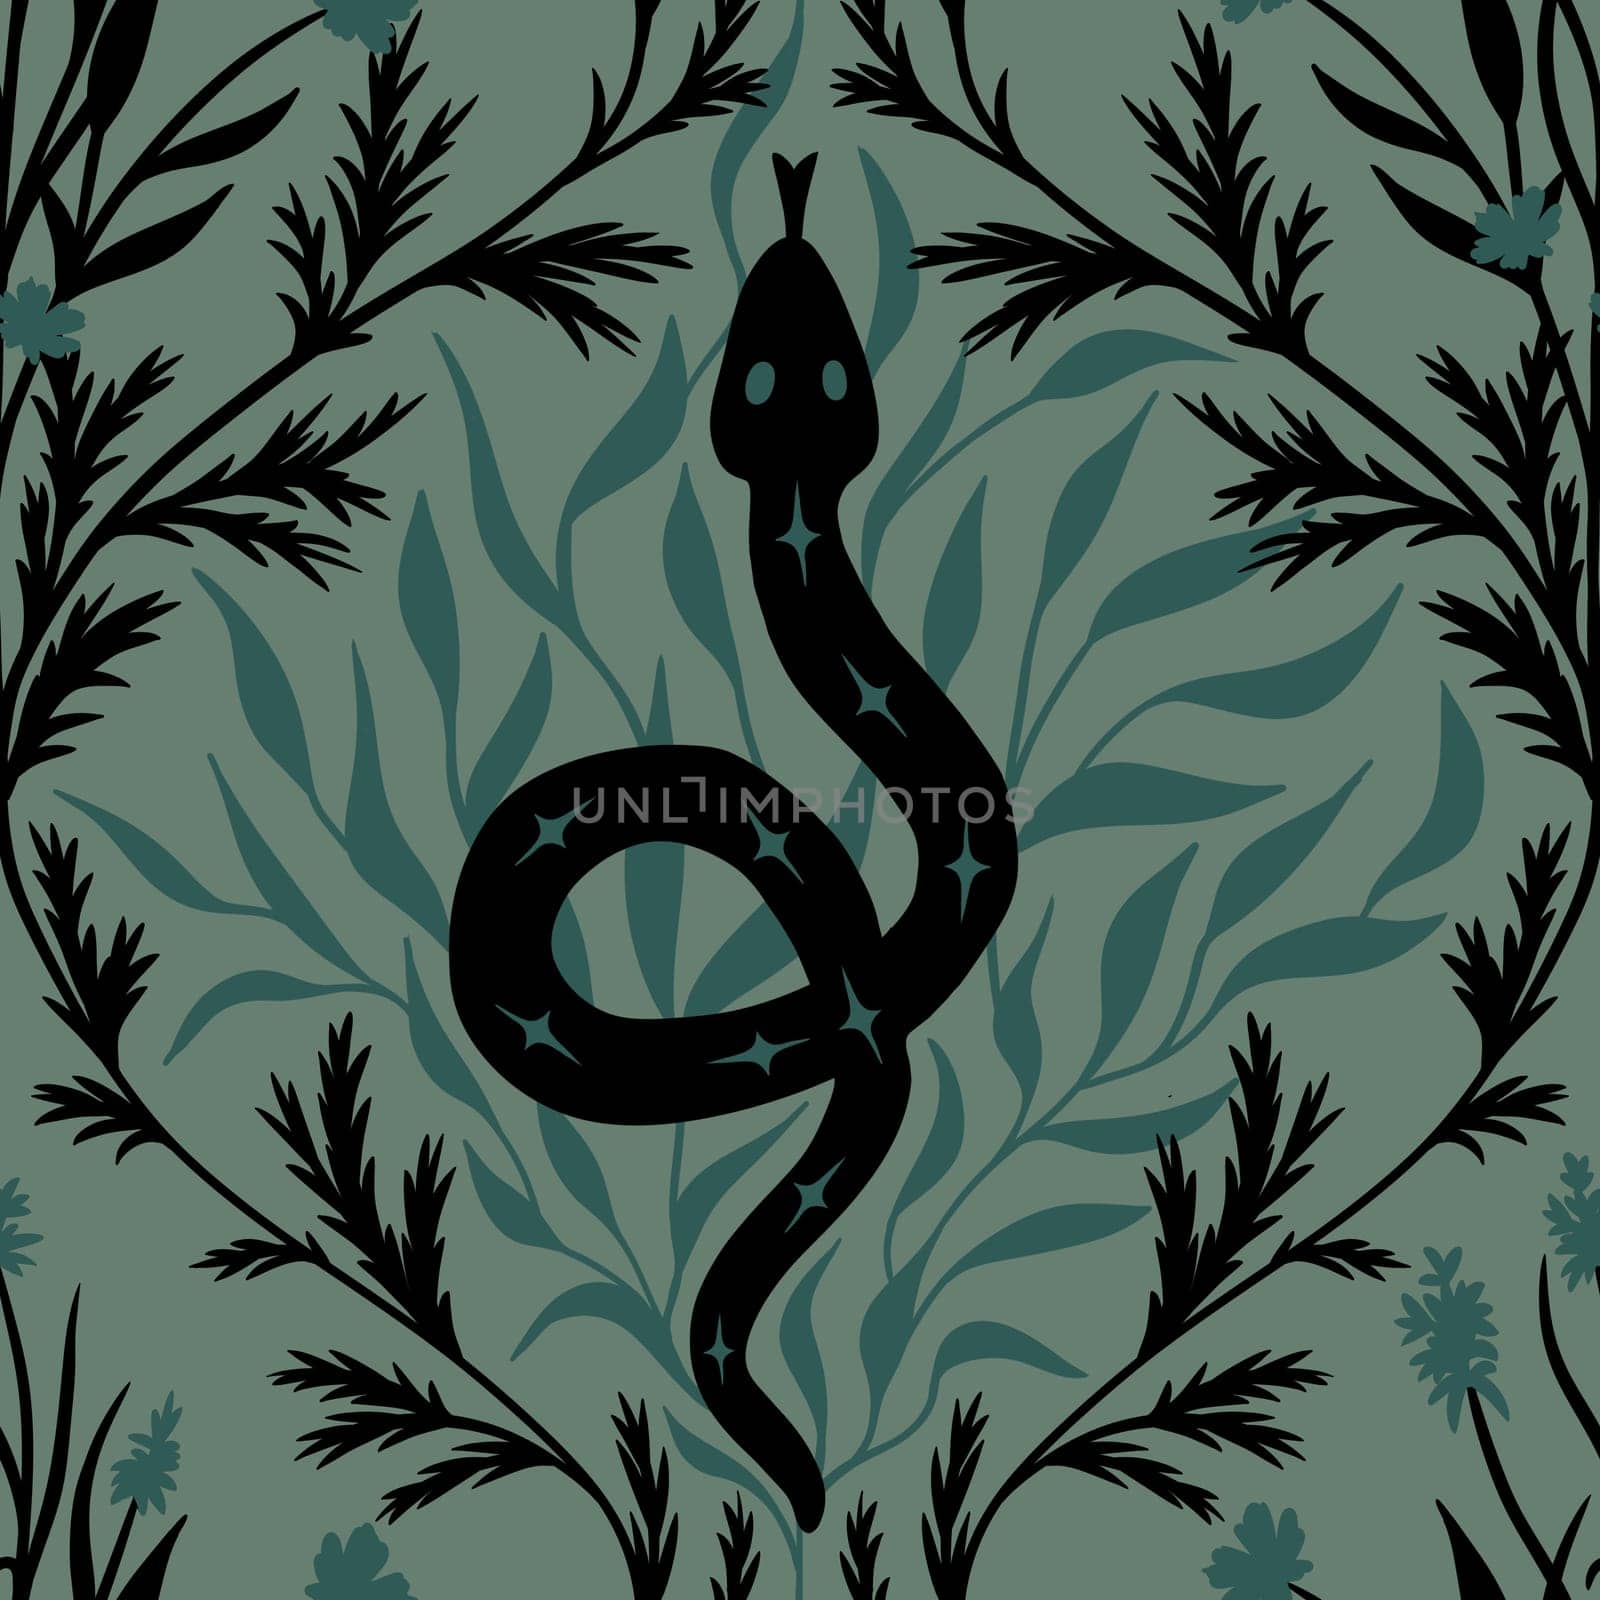 Hand drawn seamless pattern of black snake on sage green background with forest leaves. Witch witchcraft mystic occult boho design, teal grey esoteric gothic halloween print serpent art. by Lagmar